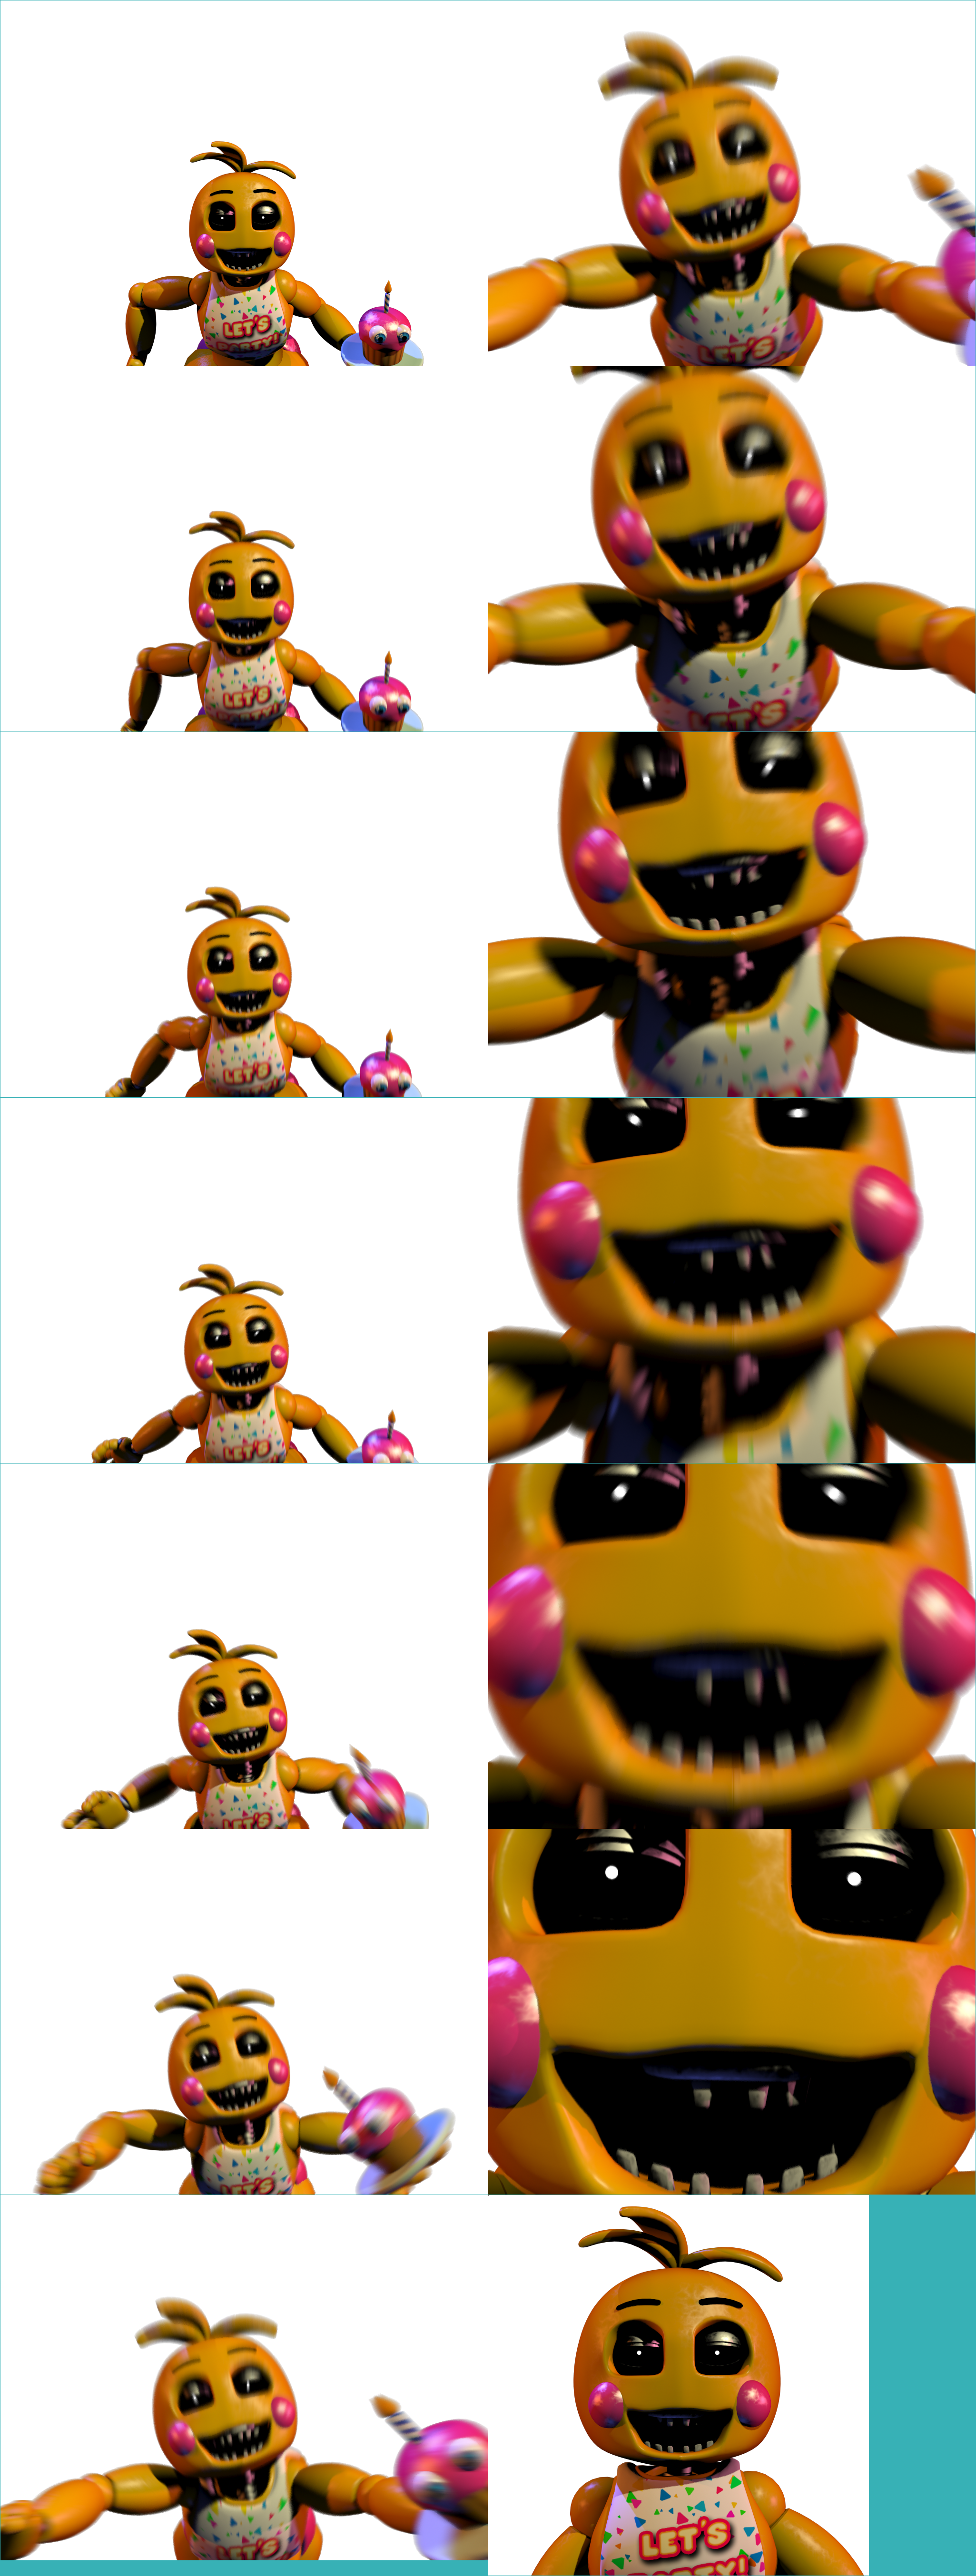 Five Nights at Freddy's 2 (Official), PC, Mobile